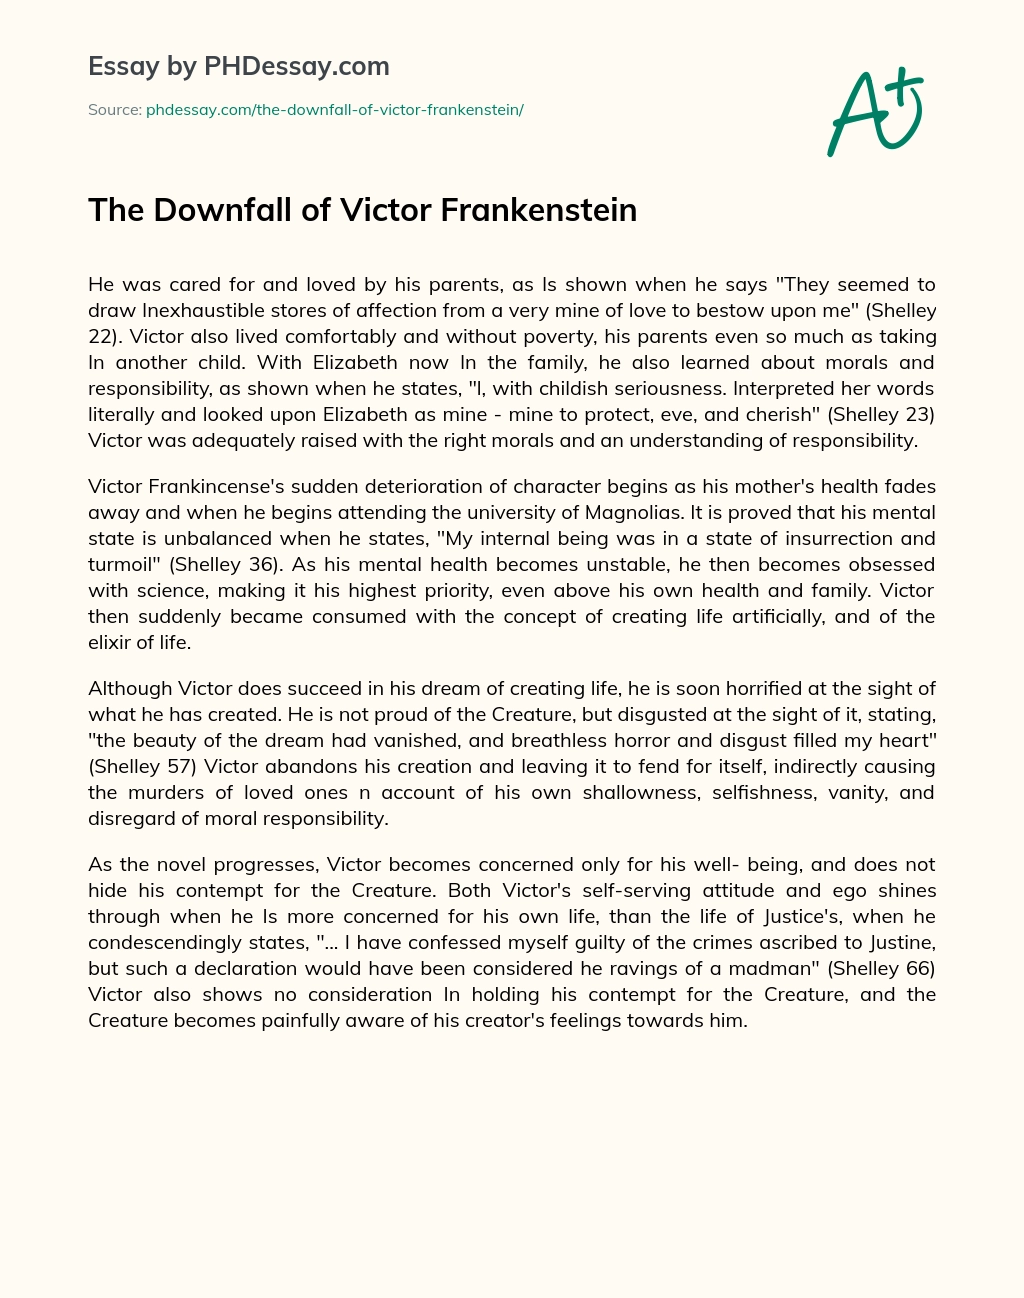 The Downfall of Victor Frankenstein essay